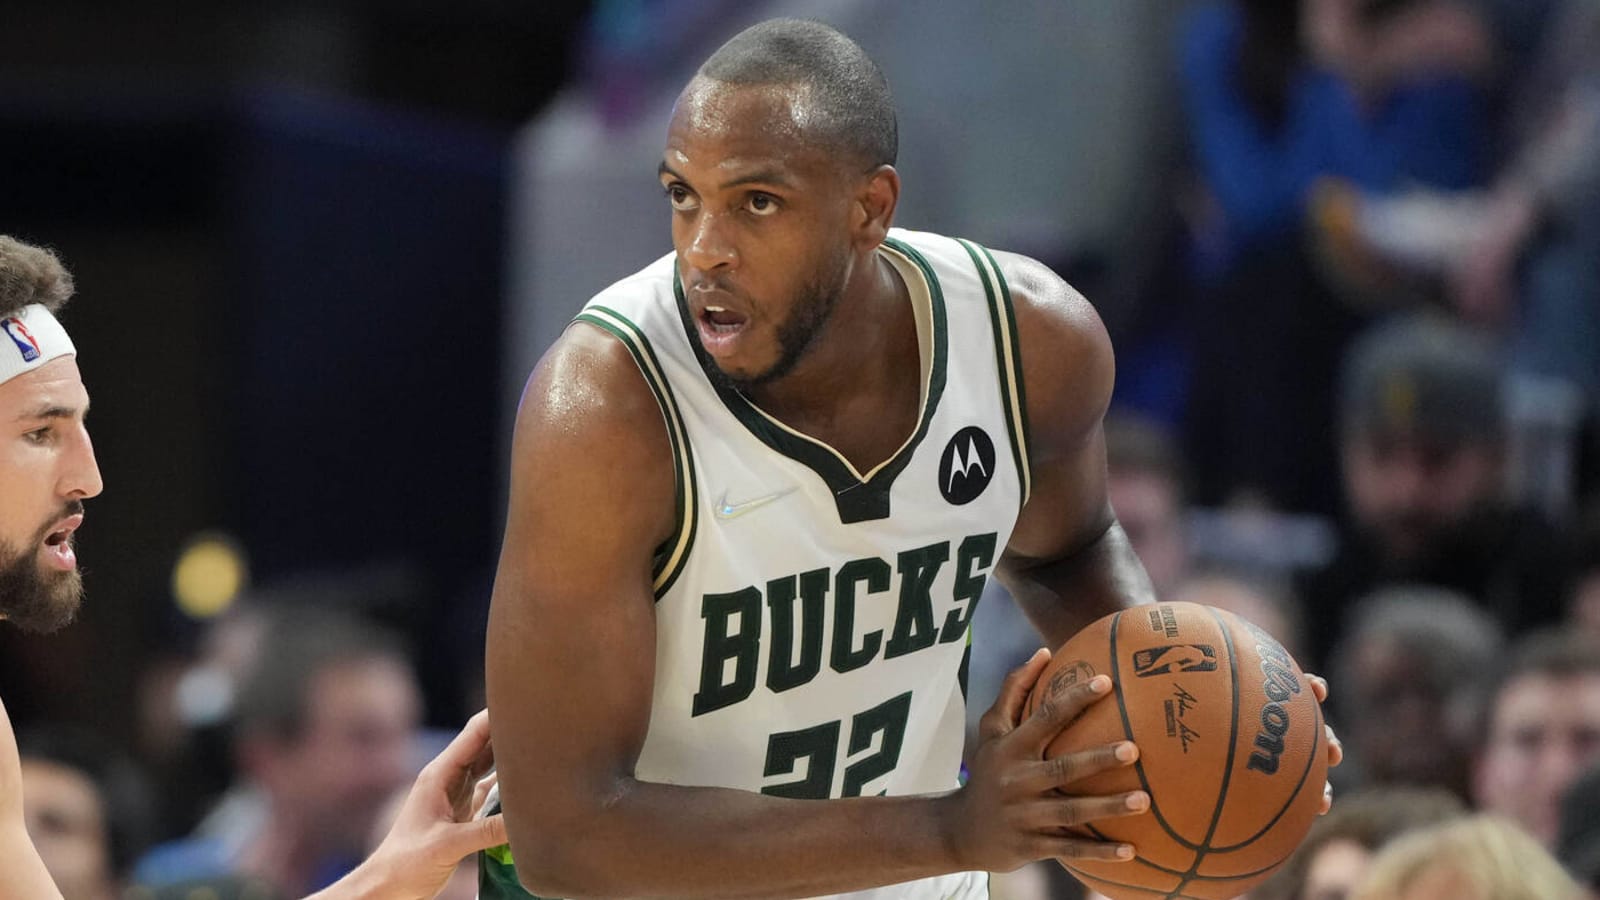 Khris Middleton unlikely to play in Game 7